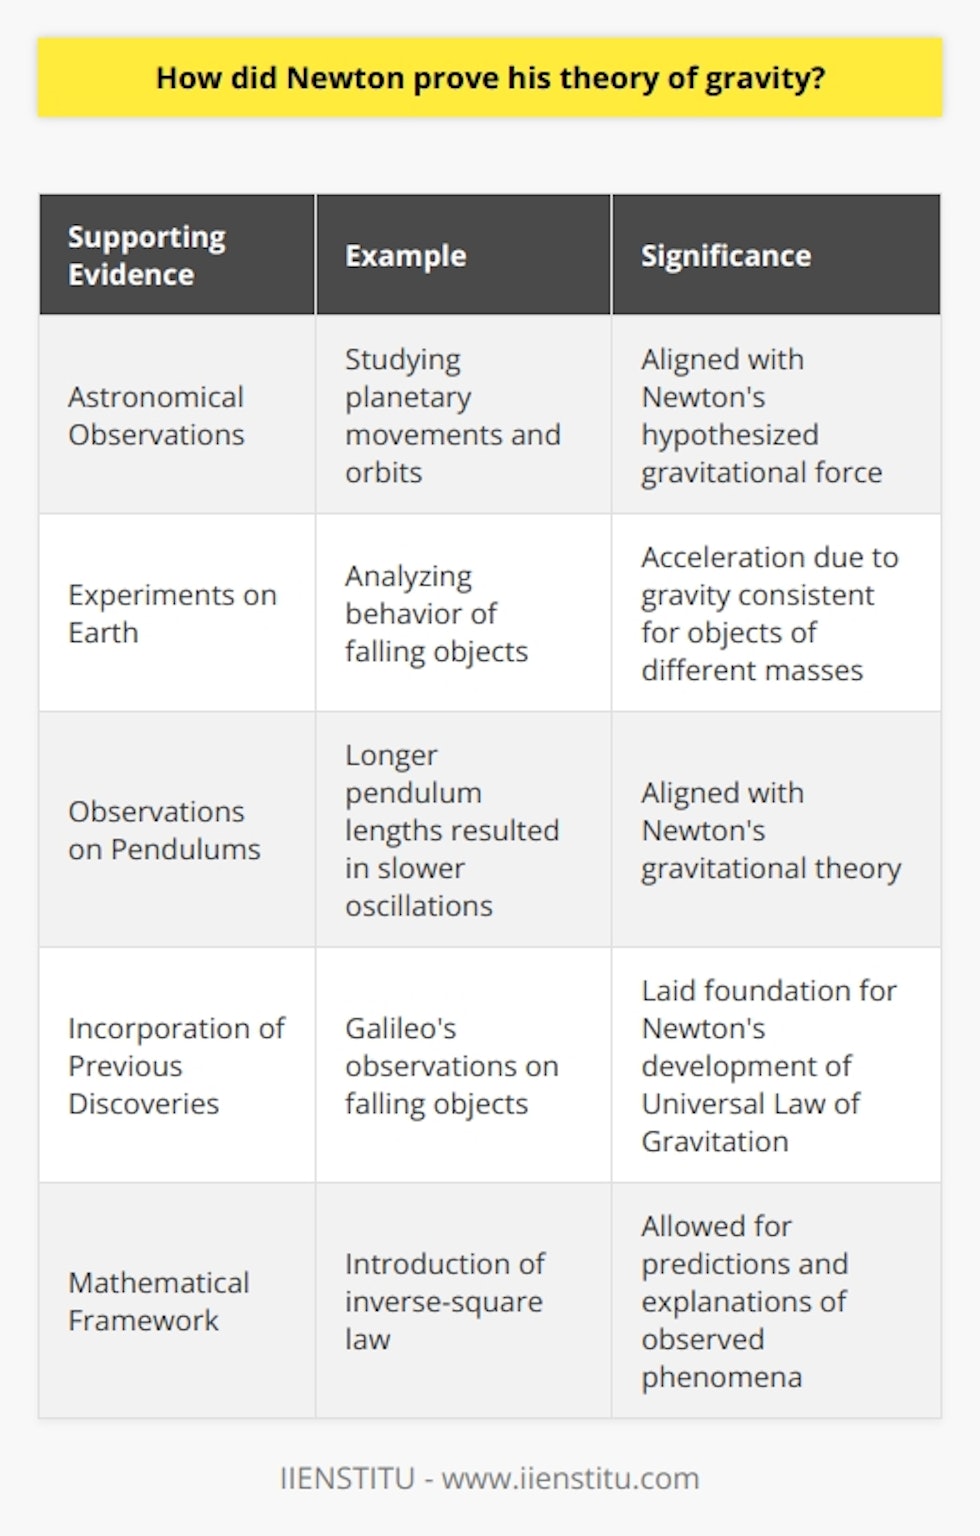 Newton's theory of gravity, known as the Universal Law of Gravitation, was supported by various forms of evidence. One key source of evidence came from astronomical observations of the planets in our solar system. By studying their movements and orbits, Newton was able to show that their orbital patterns aligned with his hypothesized gravitational force.Additionally, Newton conducted experiments on Earth to further support his theory. He analyzed the behavior of falling objects and found that their acceleration due to gravity was consistent for objects of different masses. This led him to propose that the force of gravity is proportional to an object's mass. Newton also examined pendulums and observed that longer pendulum lengths resulted in slower oscillations, which aligned with his gravitational theory.Furthermore, Newton's theory benefited from the groundwork laid by previous scientists. Galileo Galilei's observations on the motion of falling objects and Johannes Kepler's laws of planetary motion provided crucial foundations for Newton's development of the Universal Law of Gravitation.To solidify his theory and provide a quantitative description of gravity, Newton presented a mathematical framework. He introduced the concept of the inverse-square law, which states that the force between two objects is directly proportional to the product of their masses and inversely proportional to the square of the distance between them. This mathematical framework allowed for predictions and explanations pertaining to observed phenomena, such as tides and the precession of planetary orbits.In summary, Newton's theory of gravity was proven through a combination of empirical evidence, experimental data, incorporation of previous discoveries, and a robust mathematical framework. His comprehensive model of gravitational force accurately explains the motion of celestial bodies, leading to the development of classical mechanics.